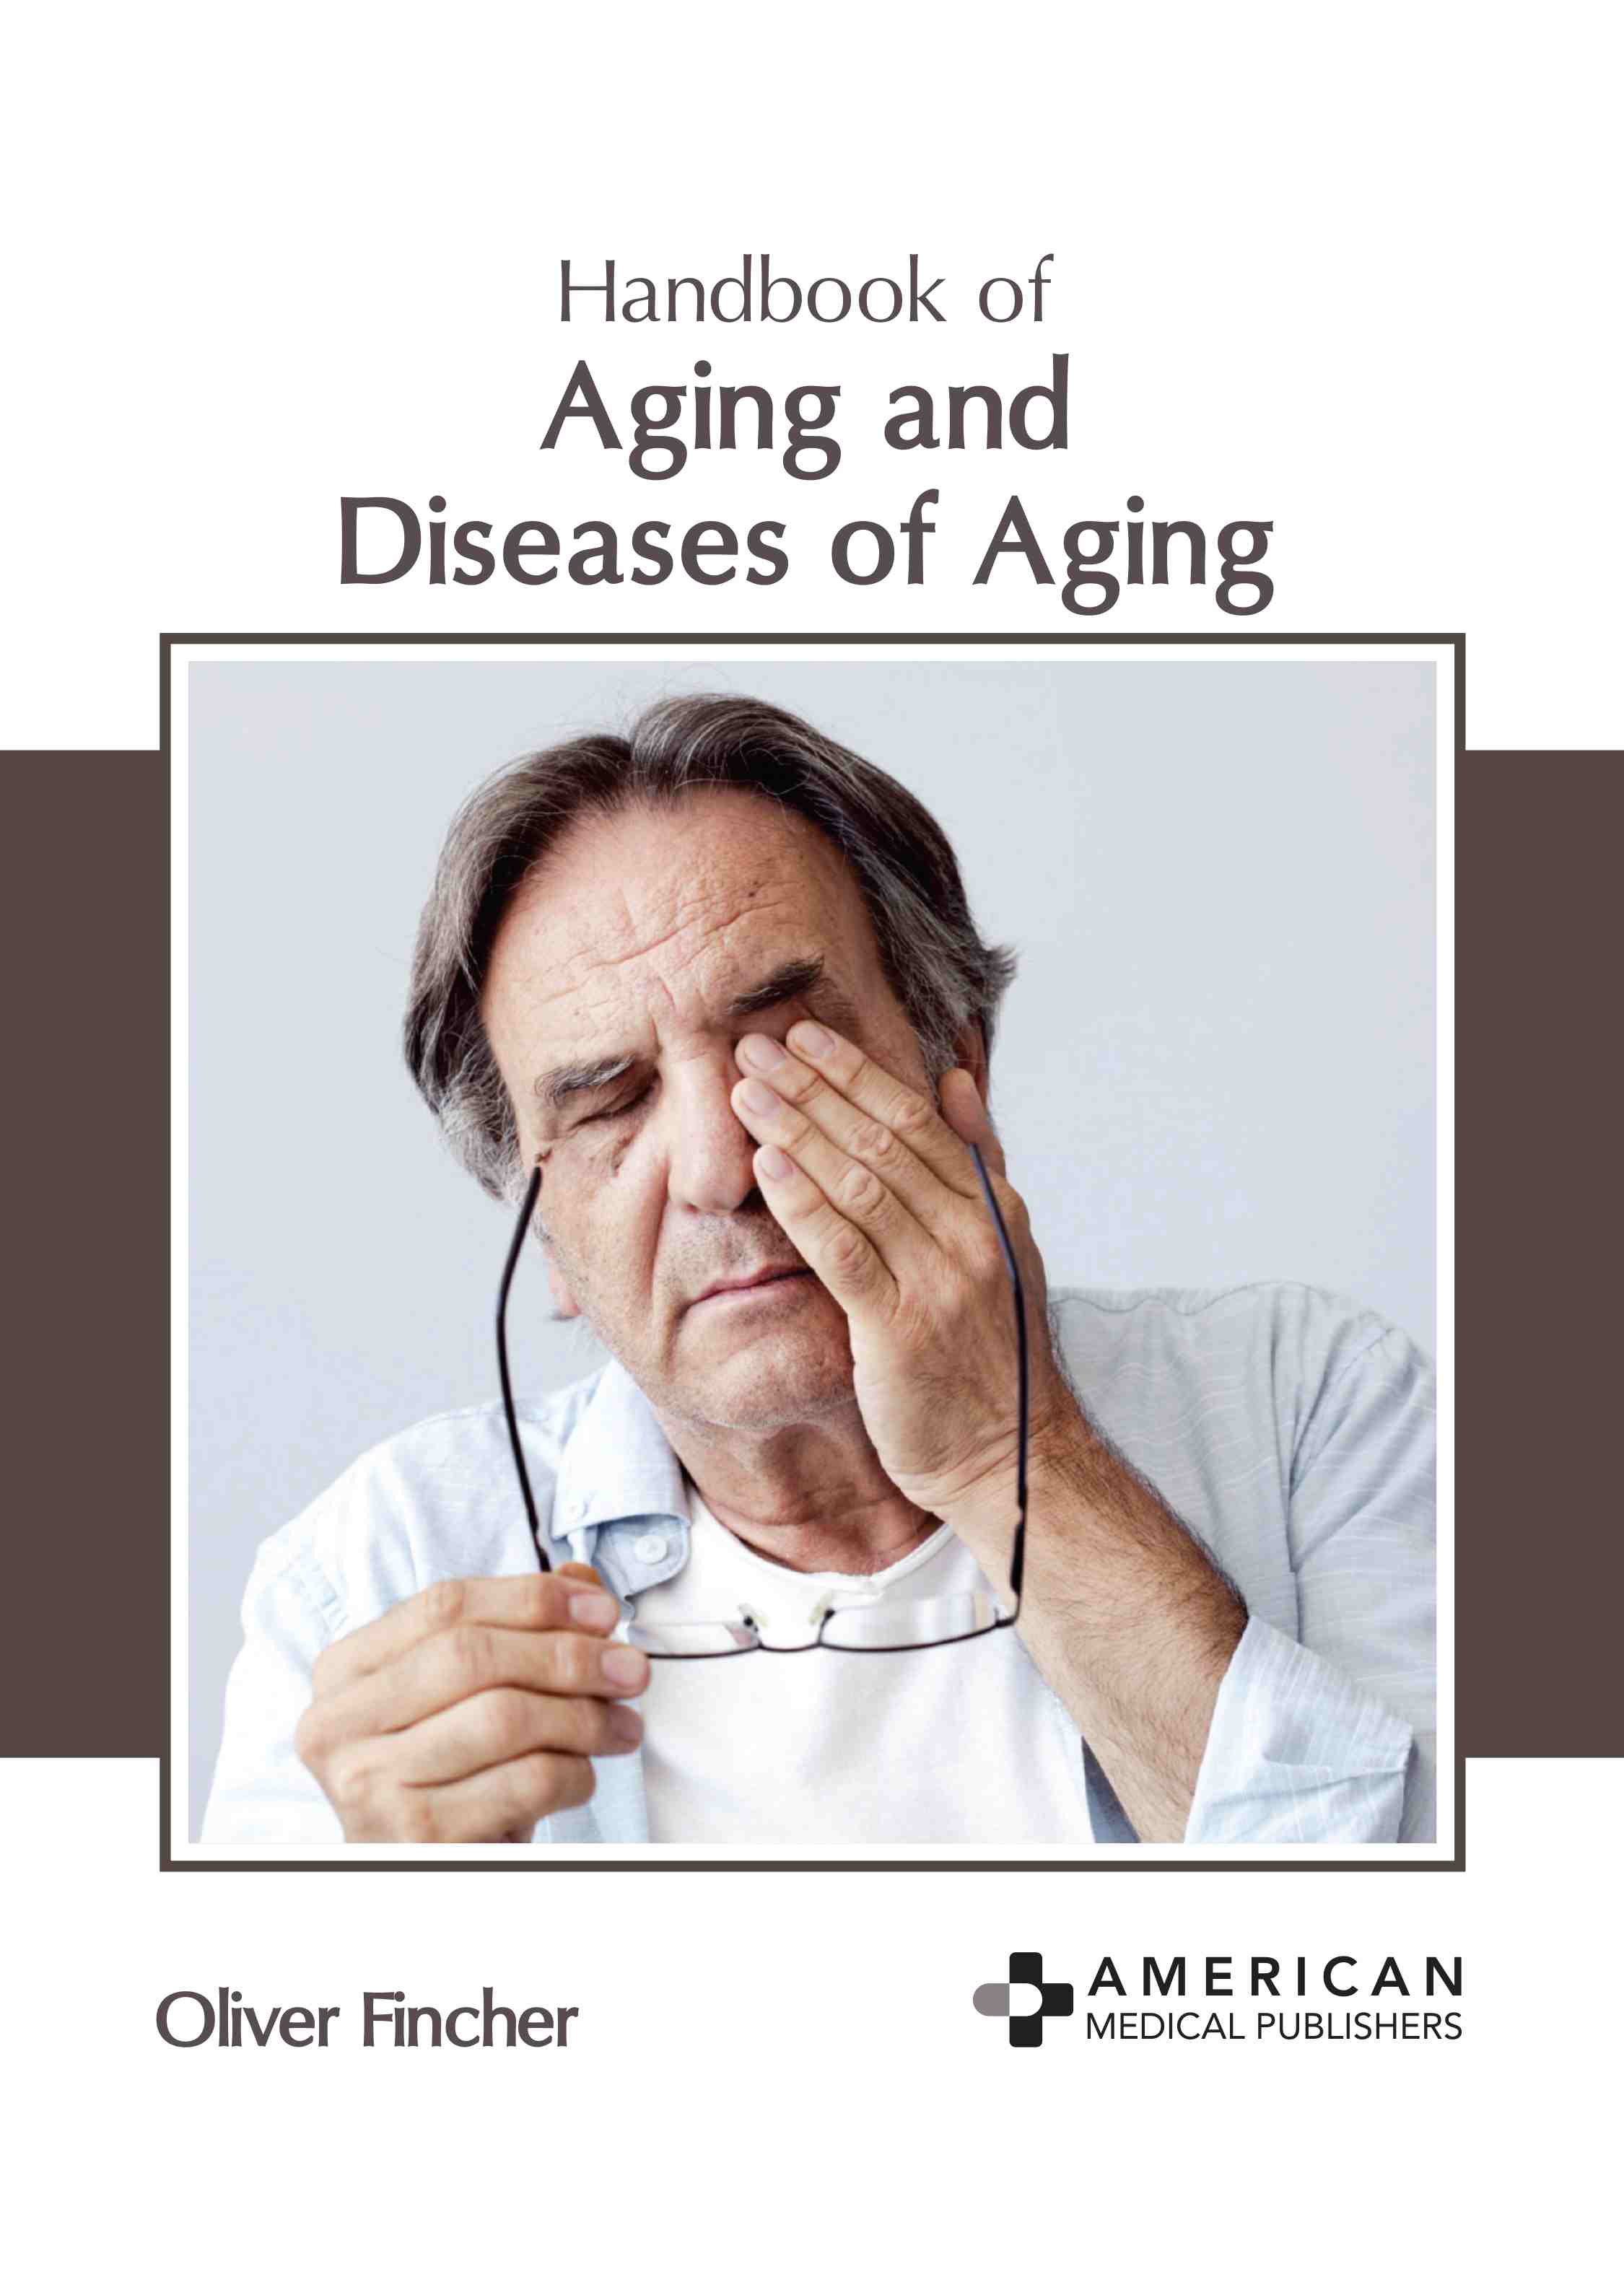 

exclusive-publishers/american-medical-publishers/handbook-of-aging-and-diseases-of-aging-9781639275809